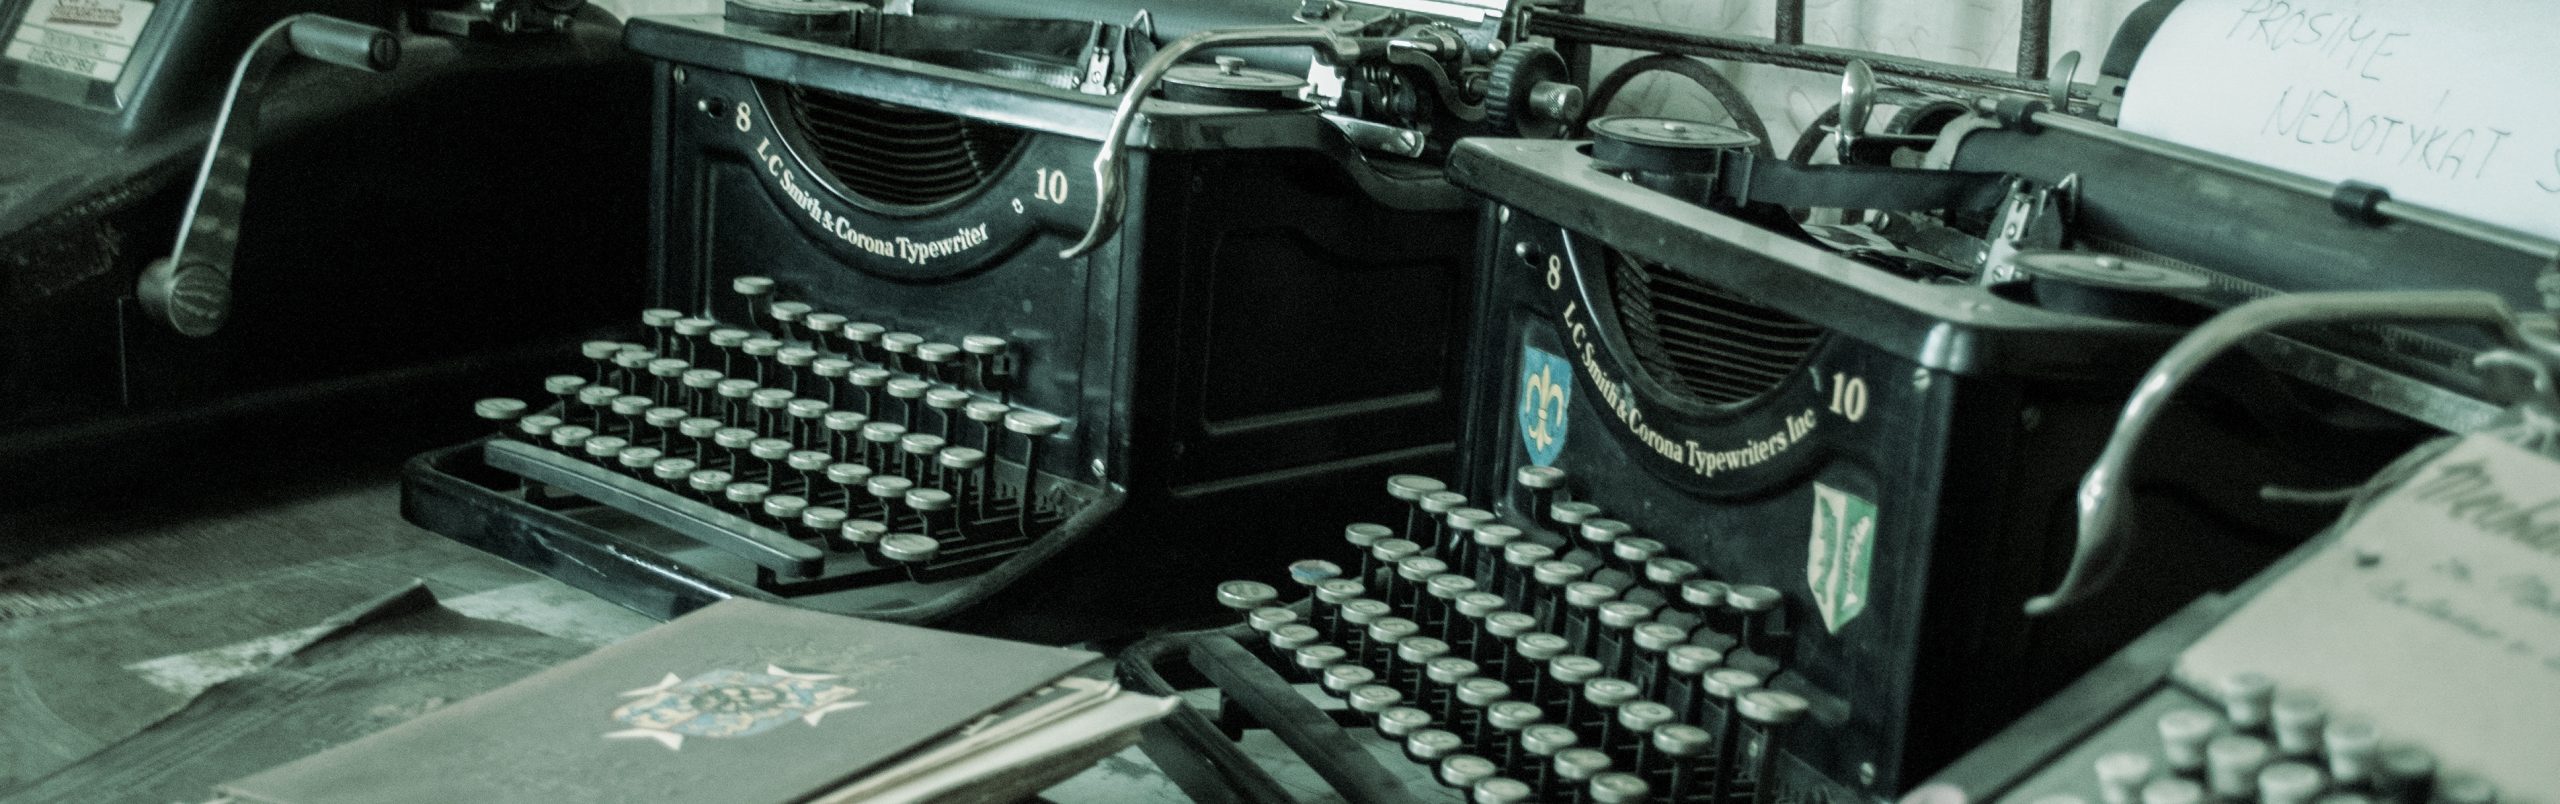 Question 810: Typewriters and Pulp Speed